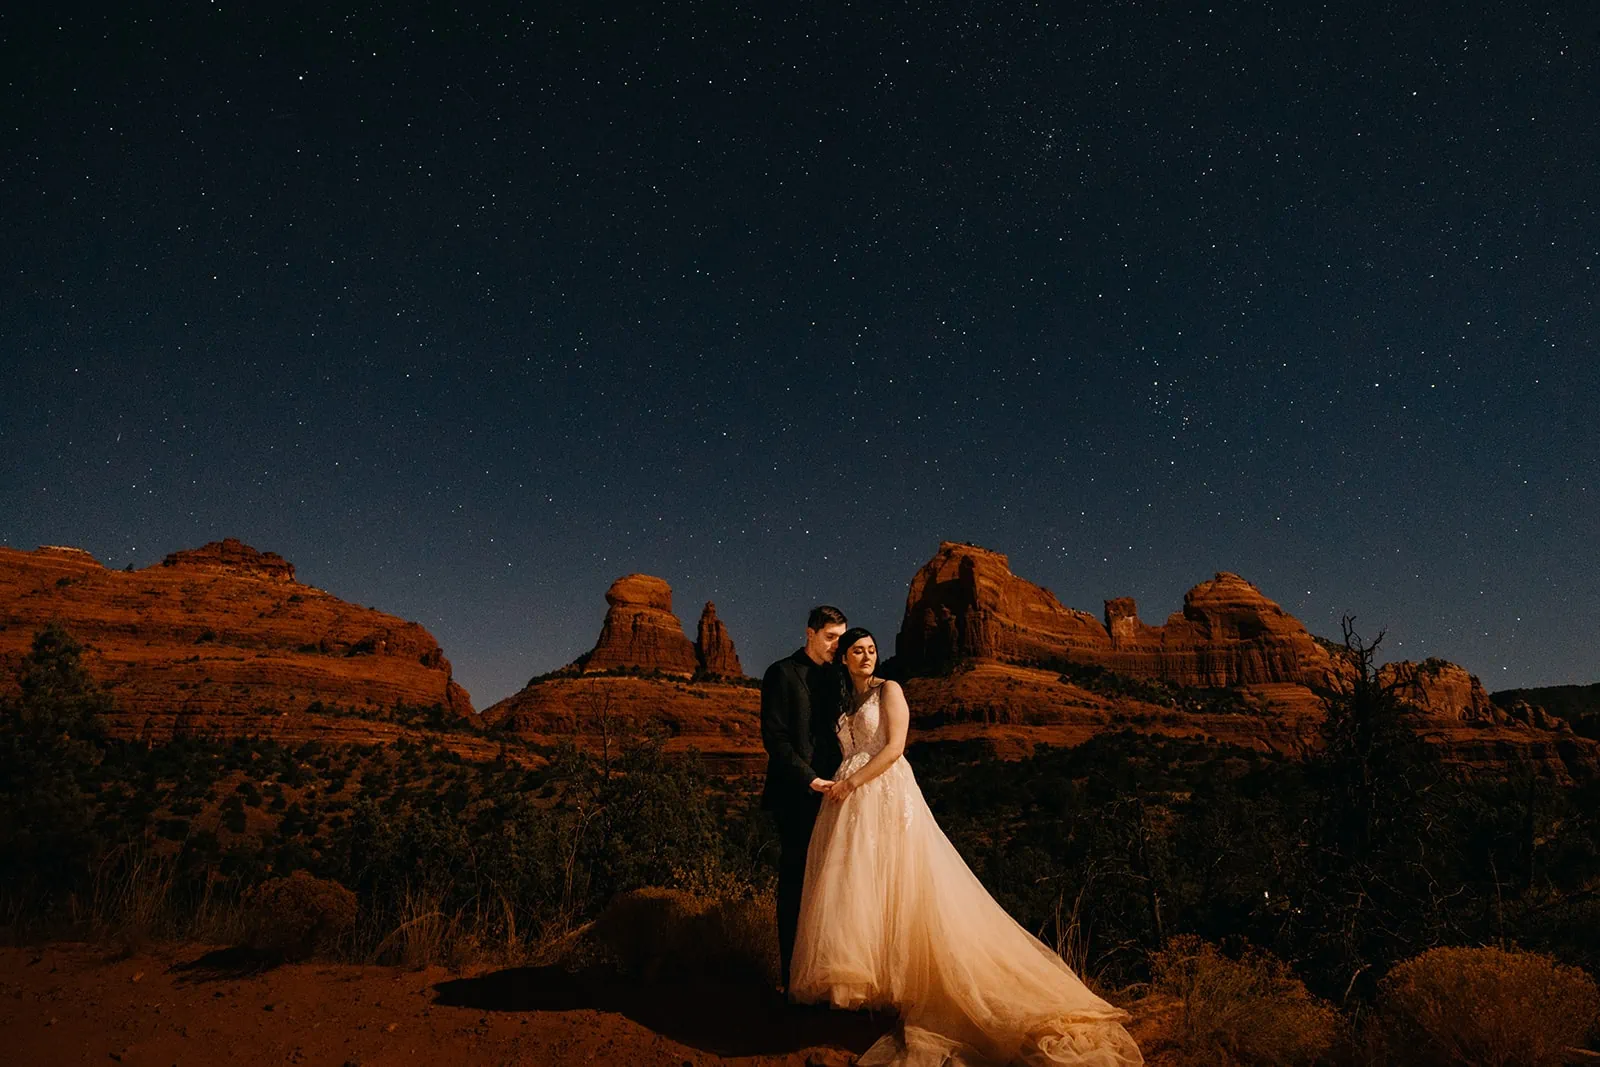 A couple stands together under the moon light and stars with red rocks behind them.